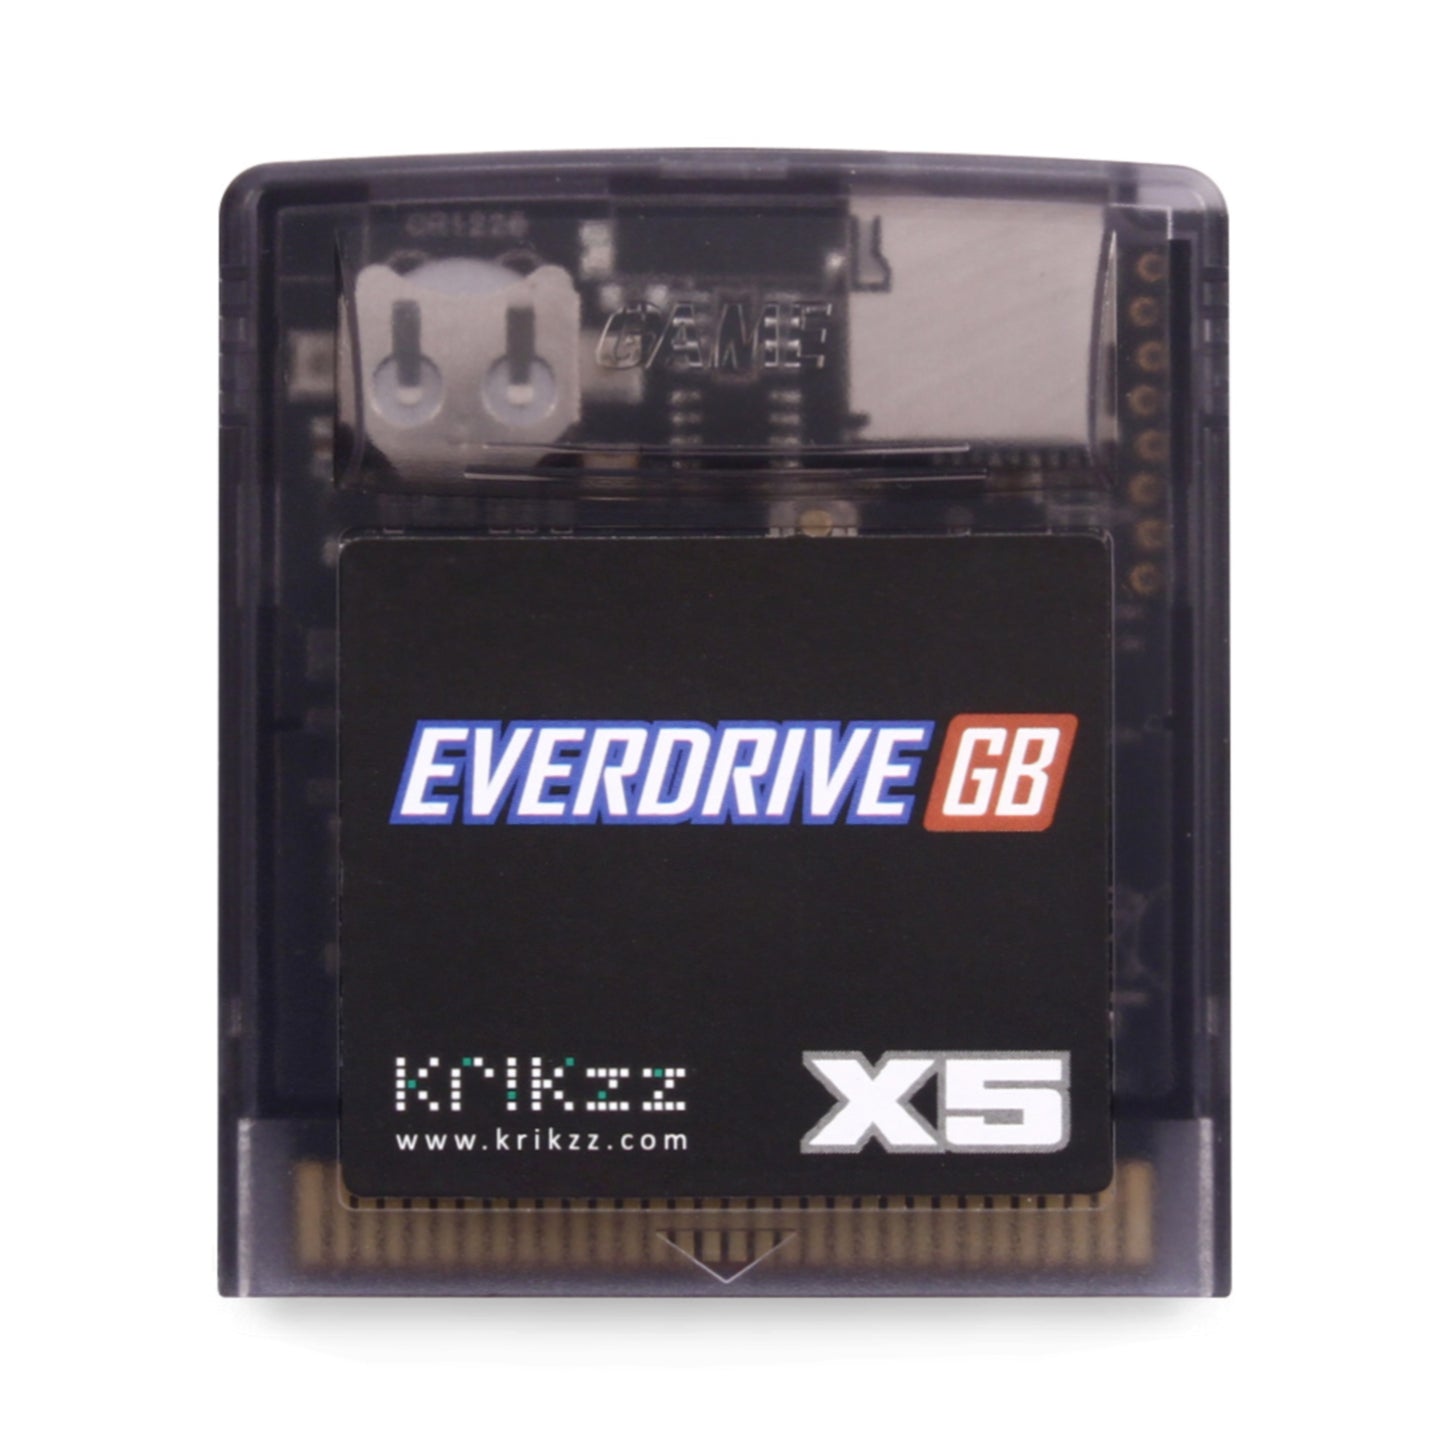 Everdrive GB X5 - Frosted Black